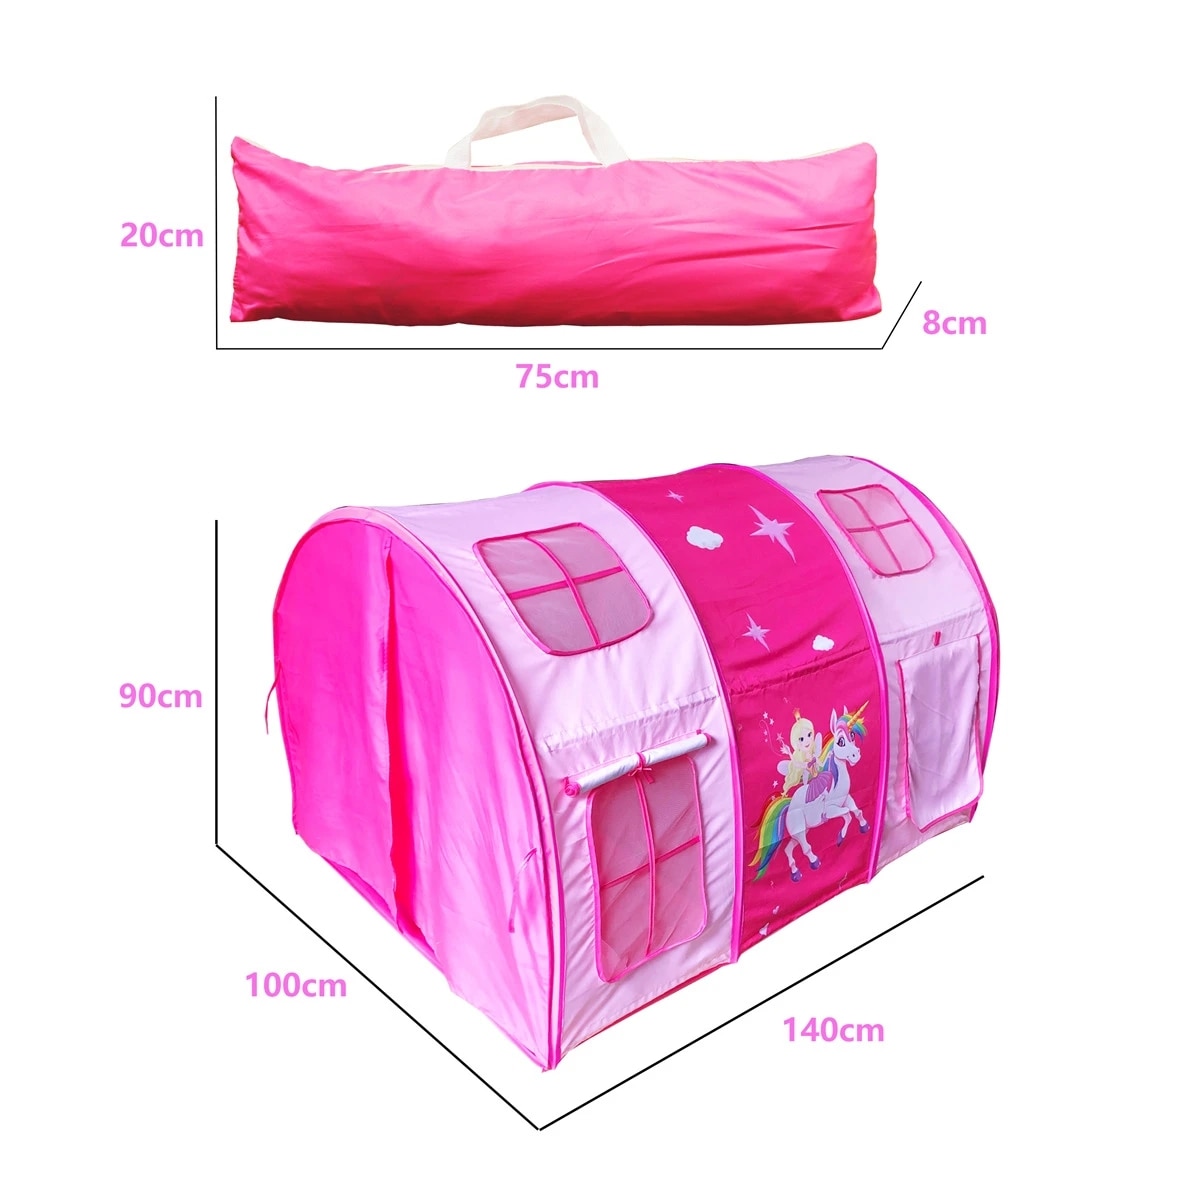 Play-Unicorn-Tent-Toy-Portable-Foldable-Ball-Pool-Pit-Indoor-Outdoor-Simulation-House-Sea-Castle-Tent-4